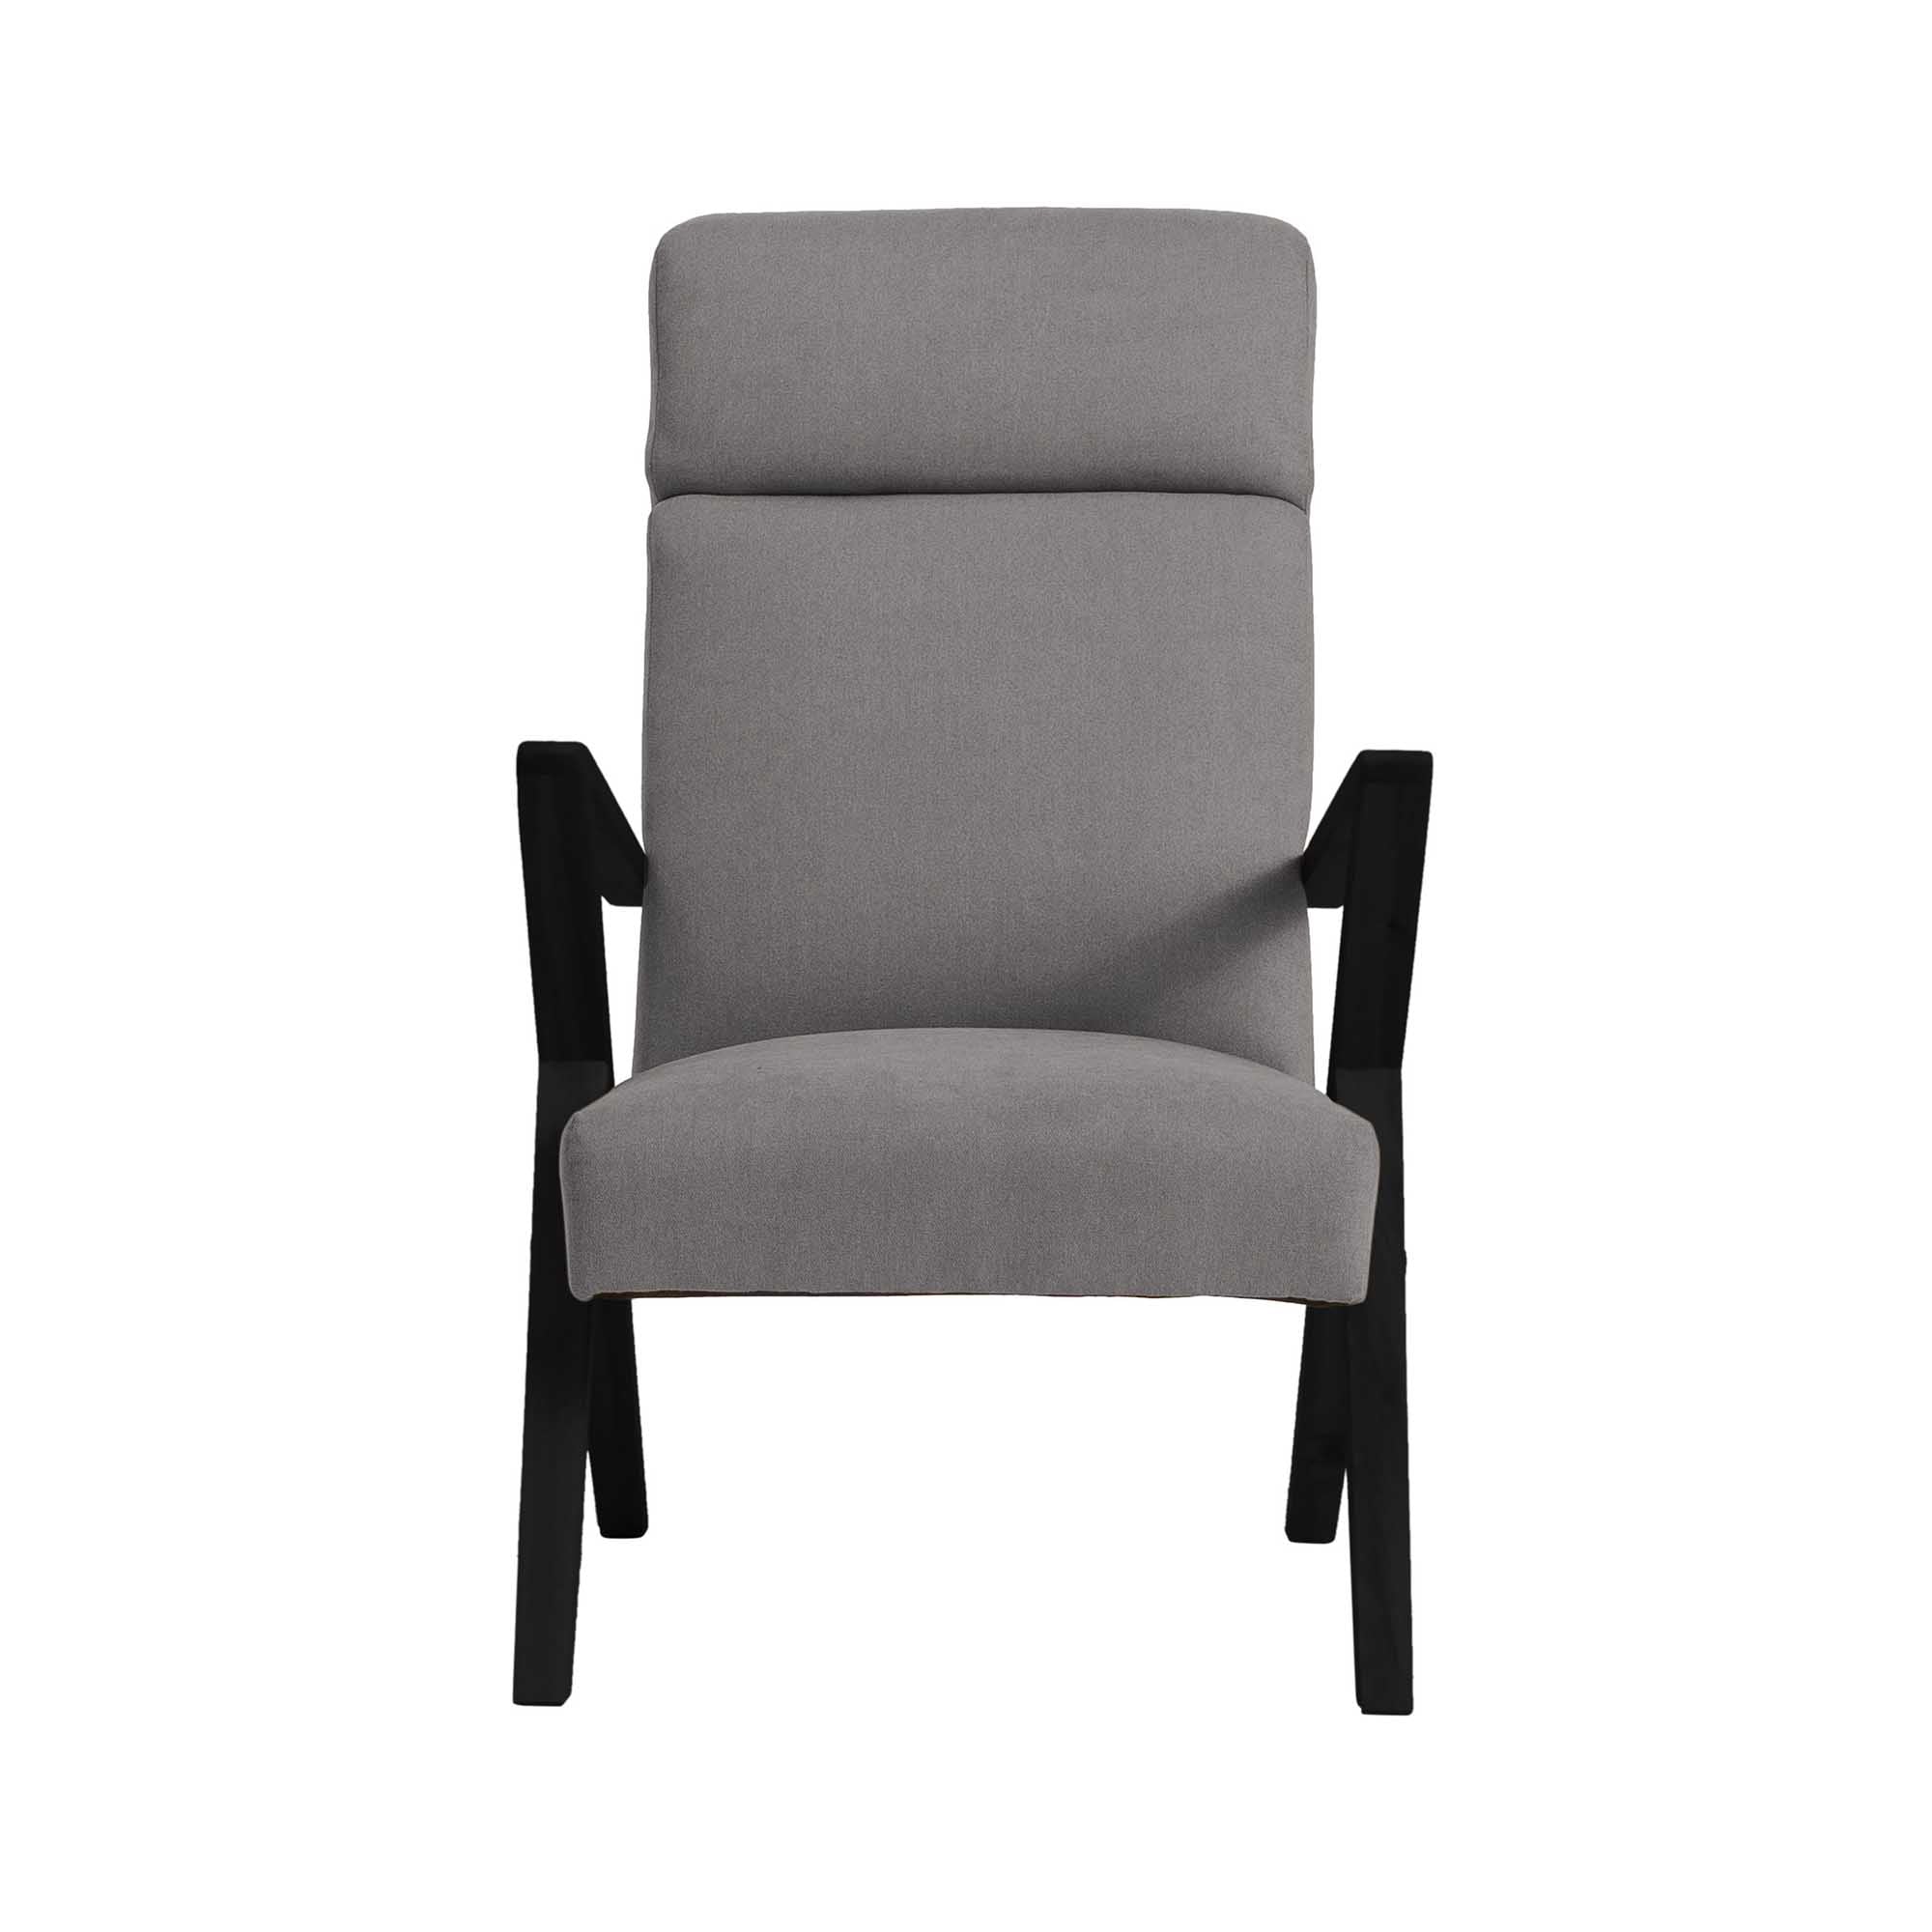 Lounge Chair, Beech Wood Frame, Black Lacquered grey fabric, front view